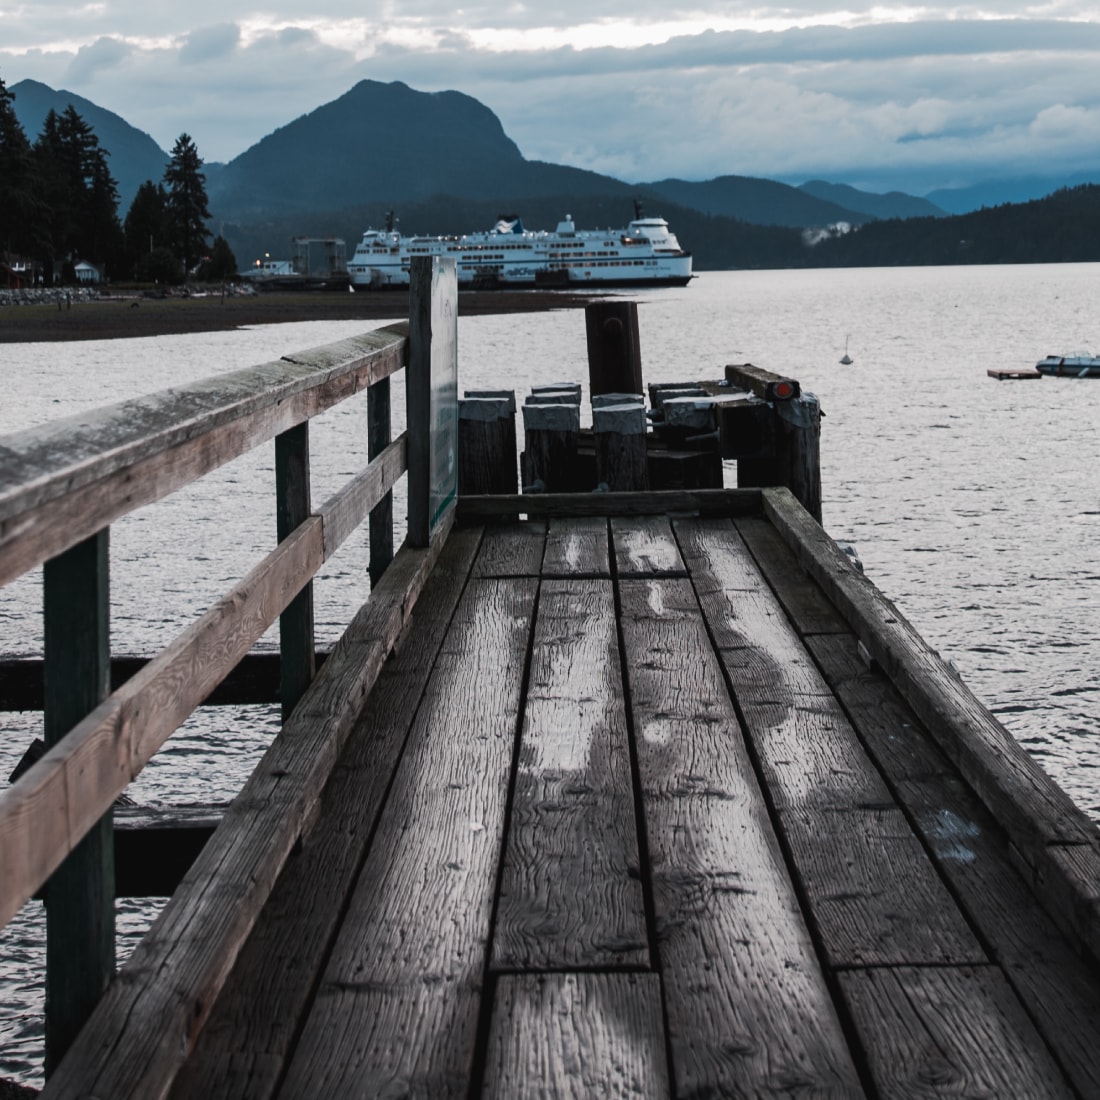 Watching a ferry from a dock on Vancouver Island